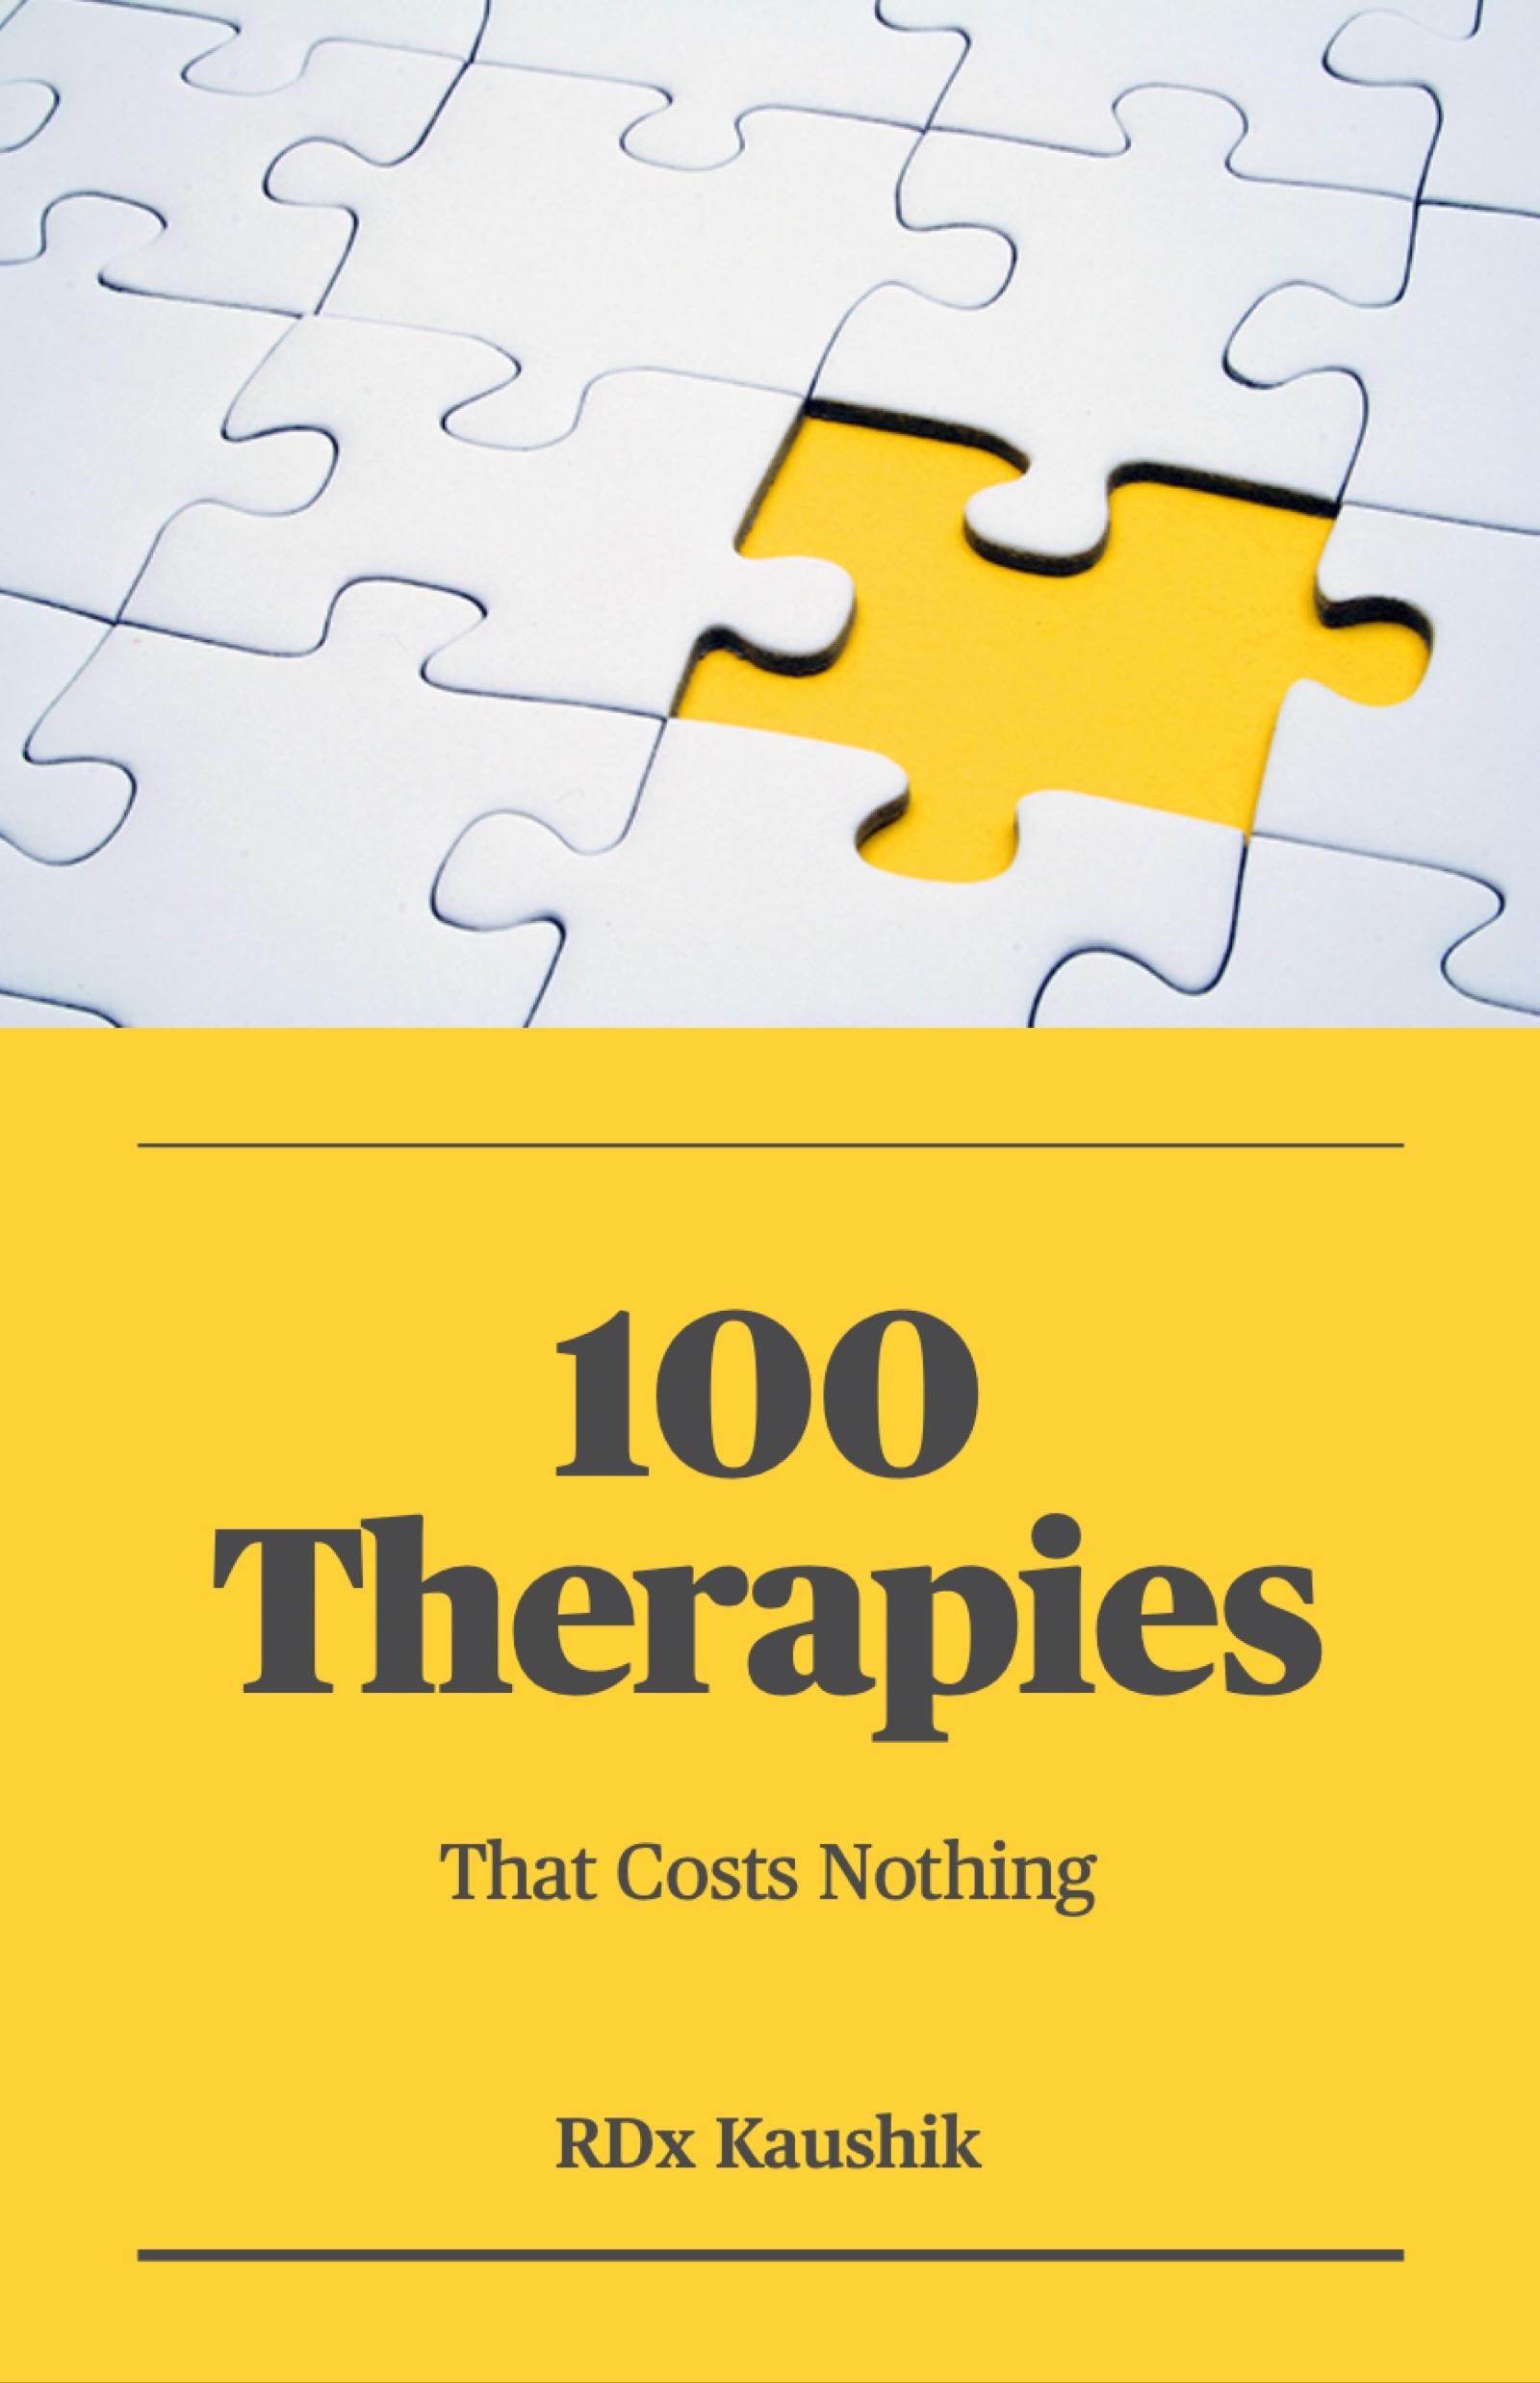 100 Therapies: That Costs Nothing